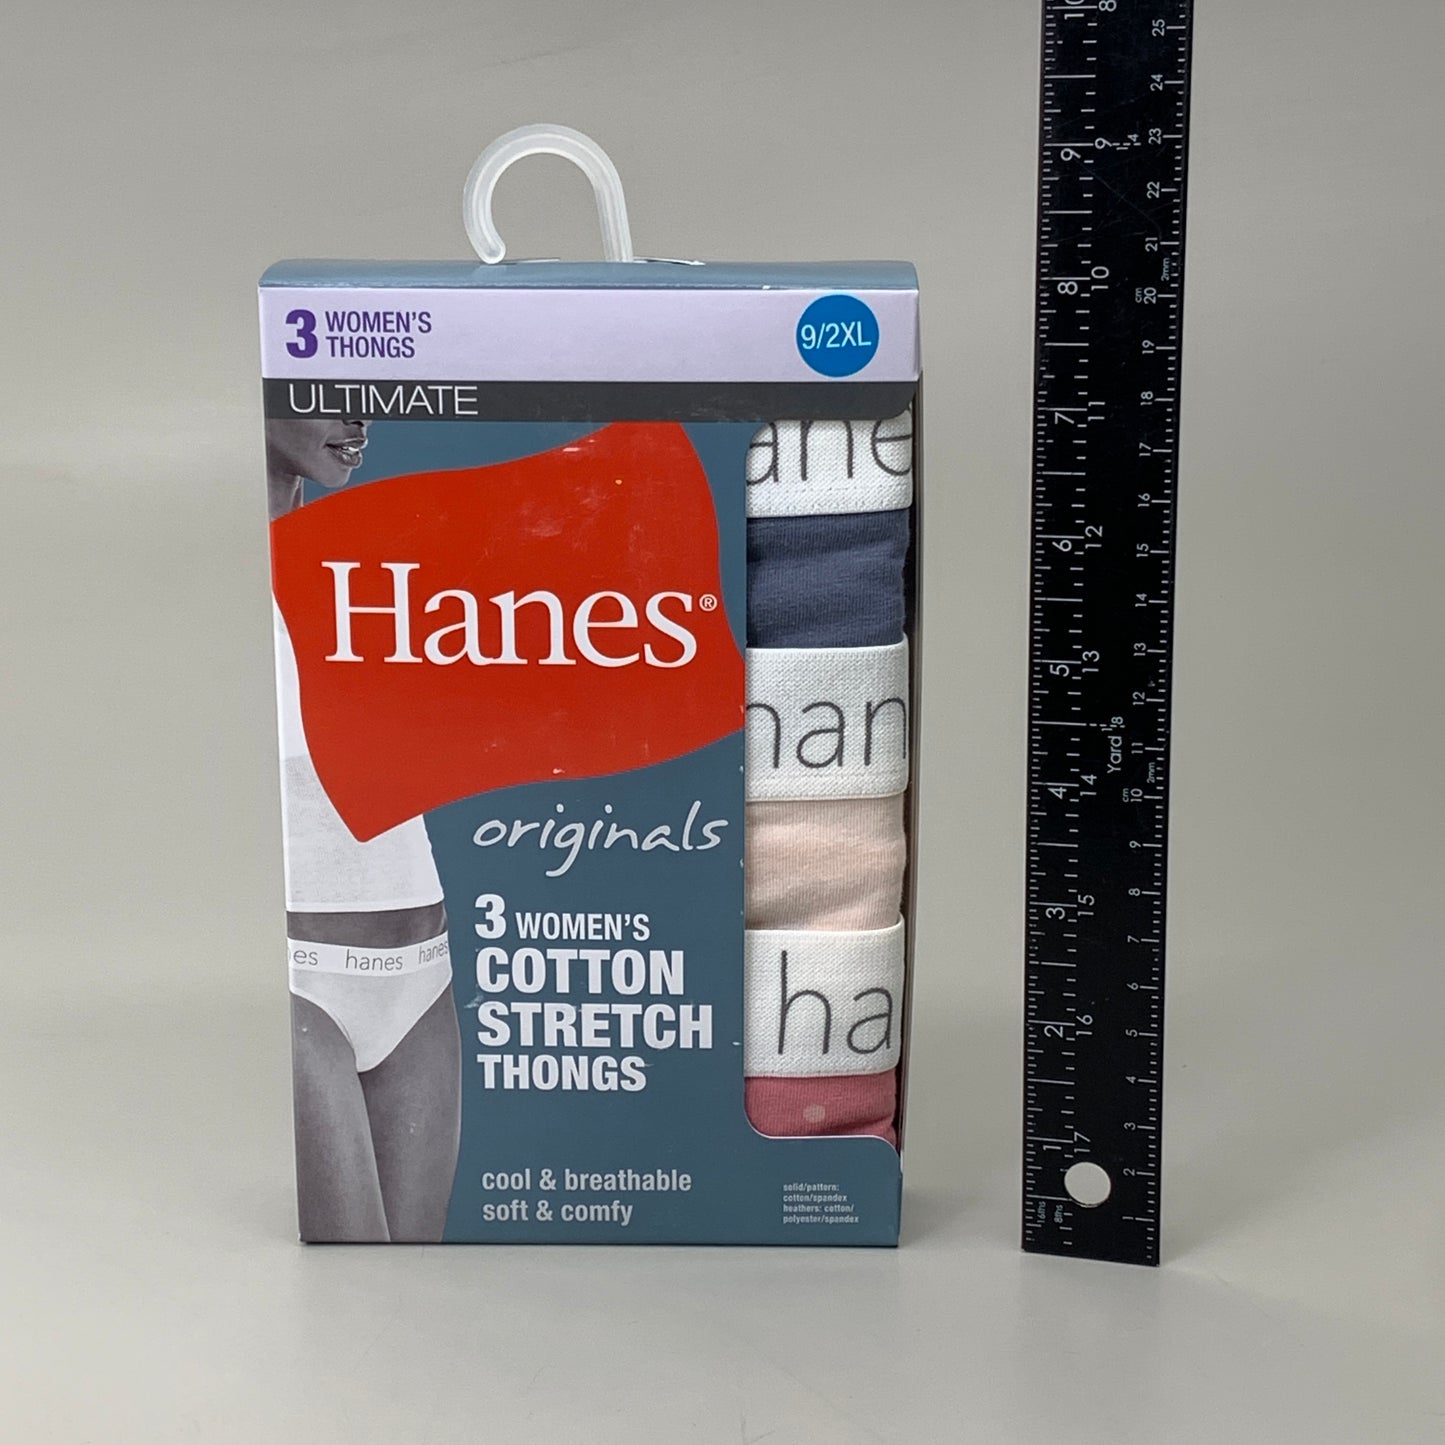 HANES 3 PACK!! Originals Women's Breathable Cotton Stretch Thongs Underwear Sz 9/2XLBlue/Buff/Pink 45OUBT